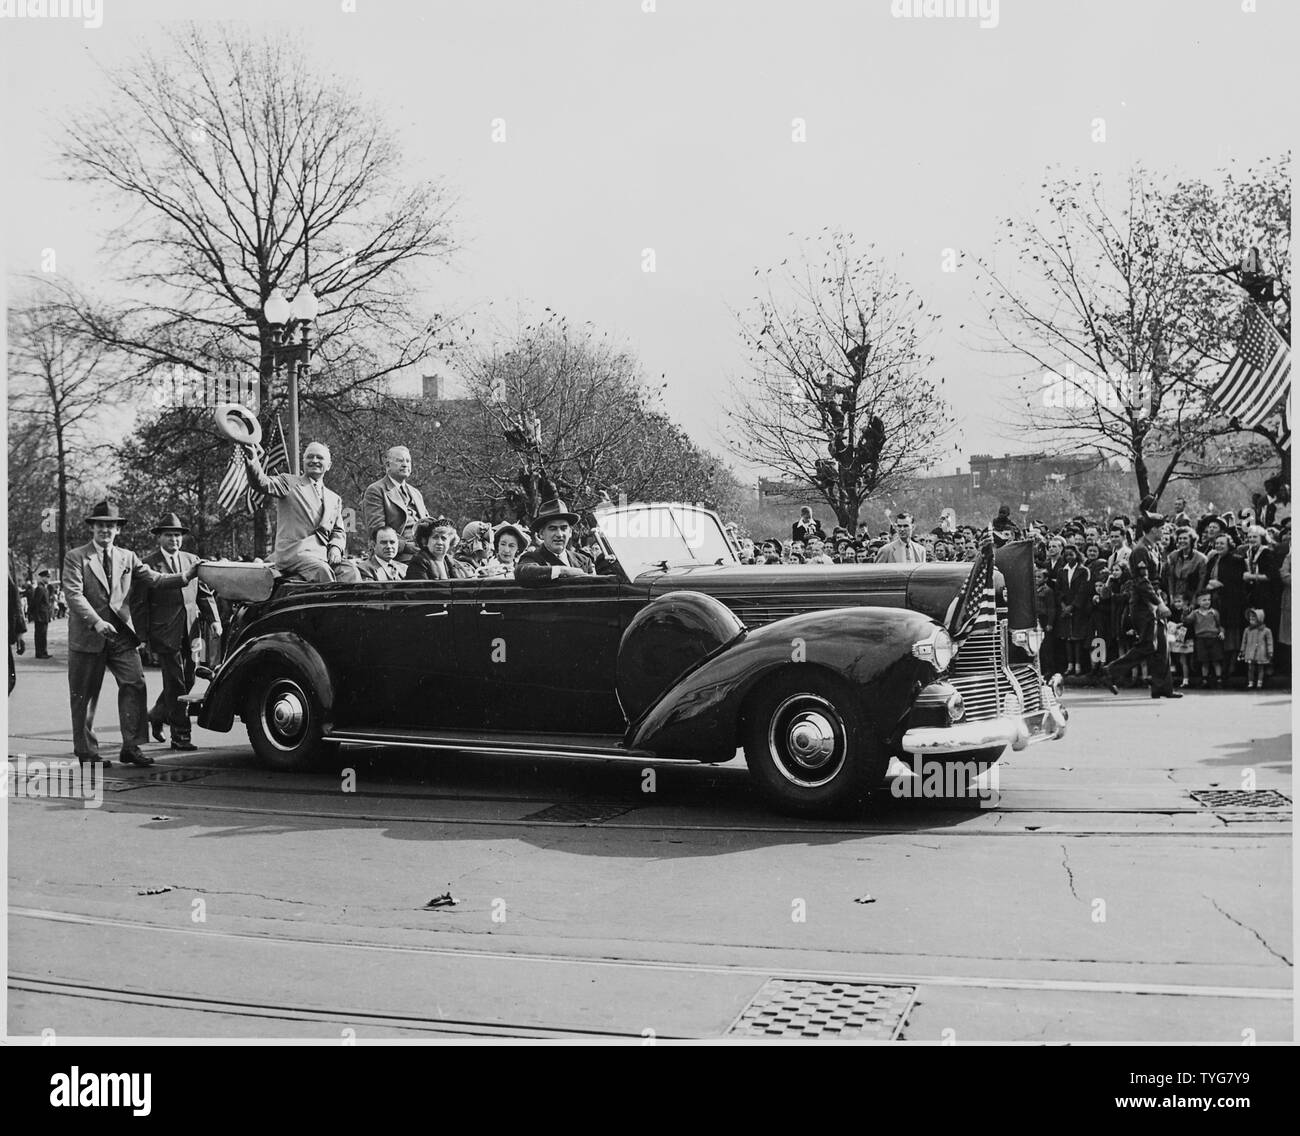 President Harry S. Truman and Vice President-elect Alben W. Barkley, riding on the back of an open car down a street in Washington, DC; President Truman is waving his hat to the crowd. Truman and Barkley had just returned to Washington after winning the election of 1948. Stock Photo